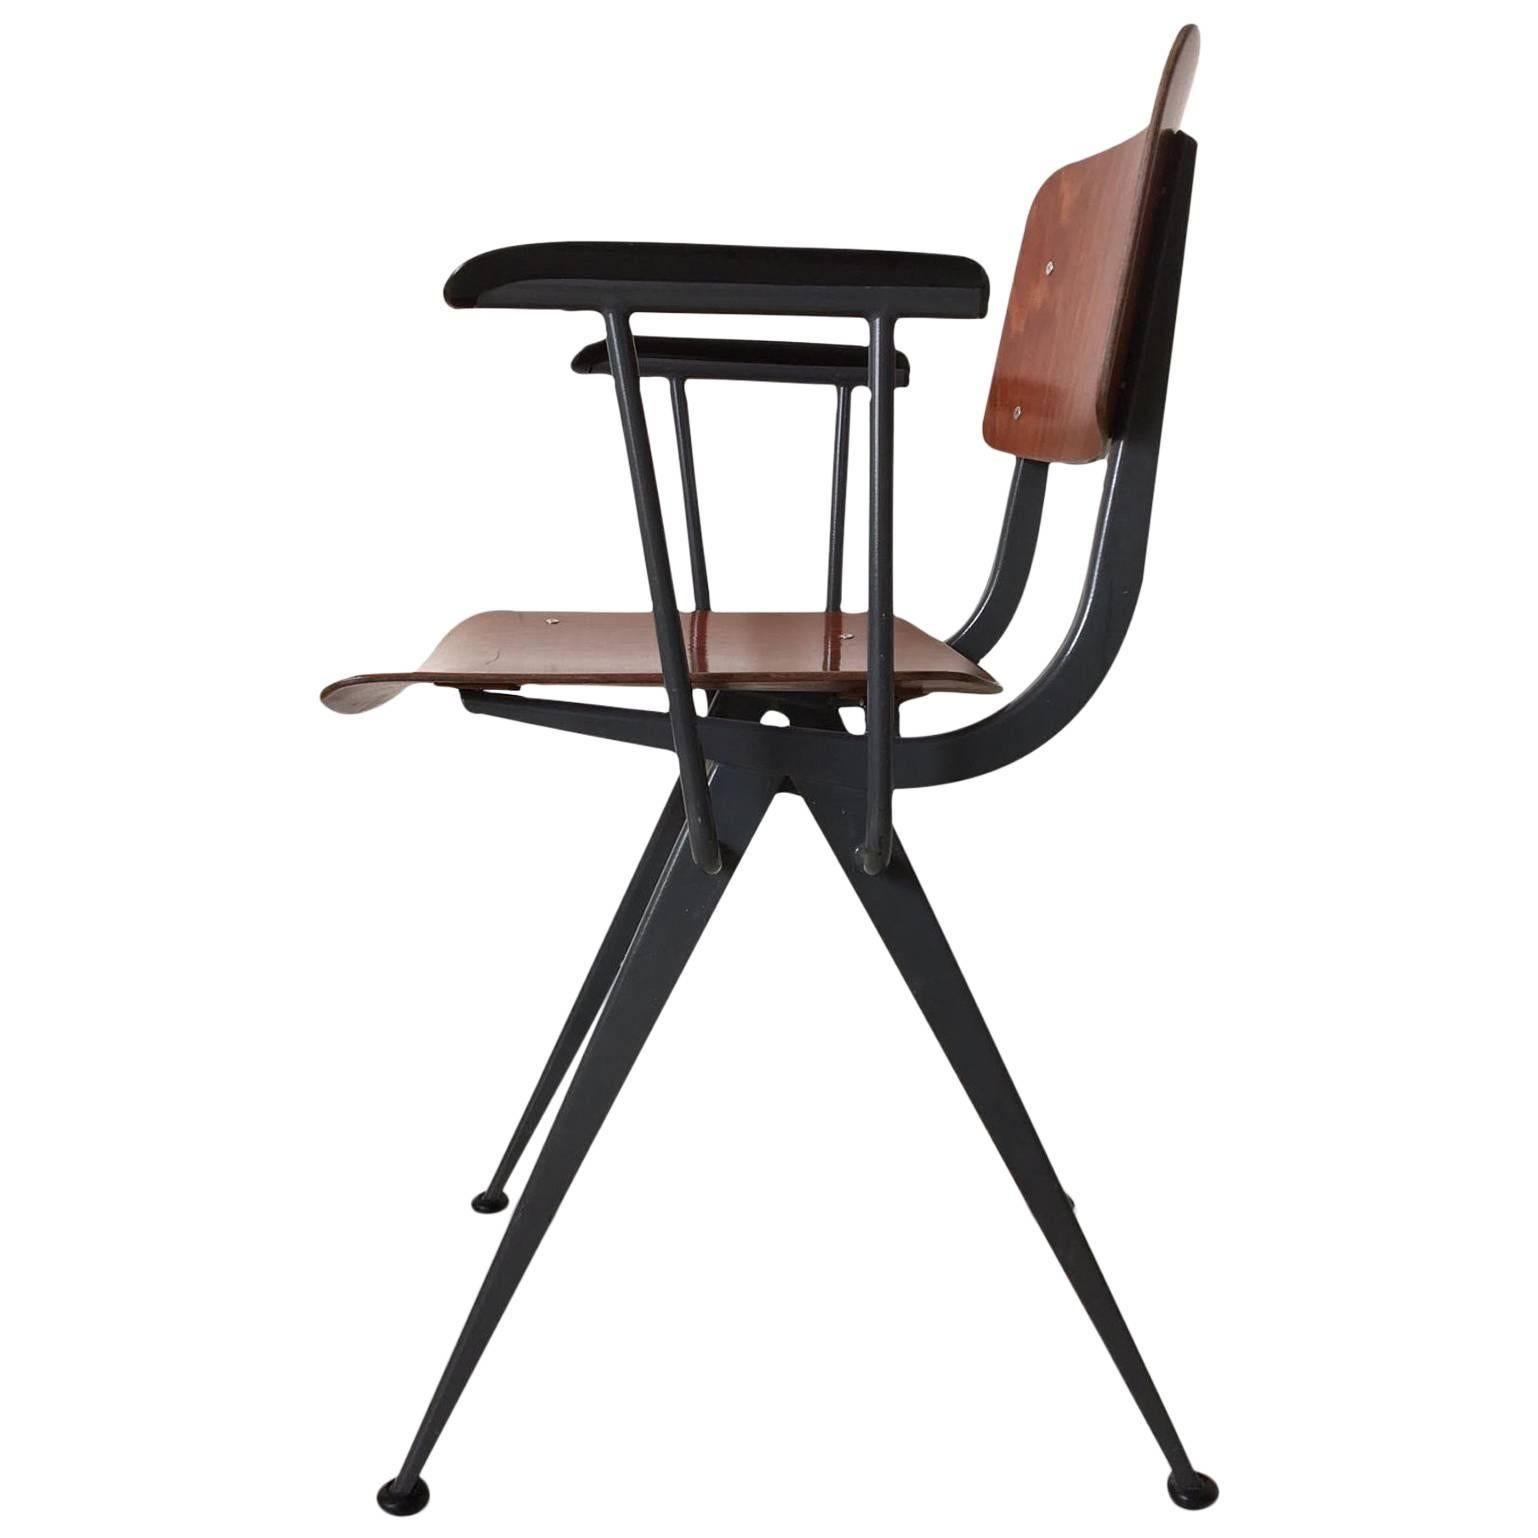 Midcentury Prouvé Inspired Industrial Armchair Attributed to Friso Kramer